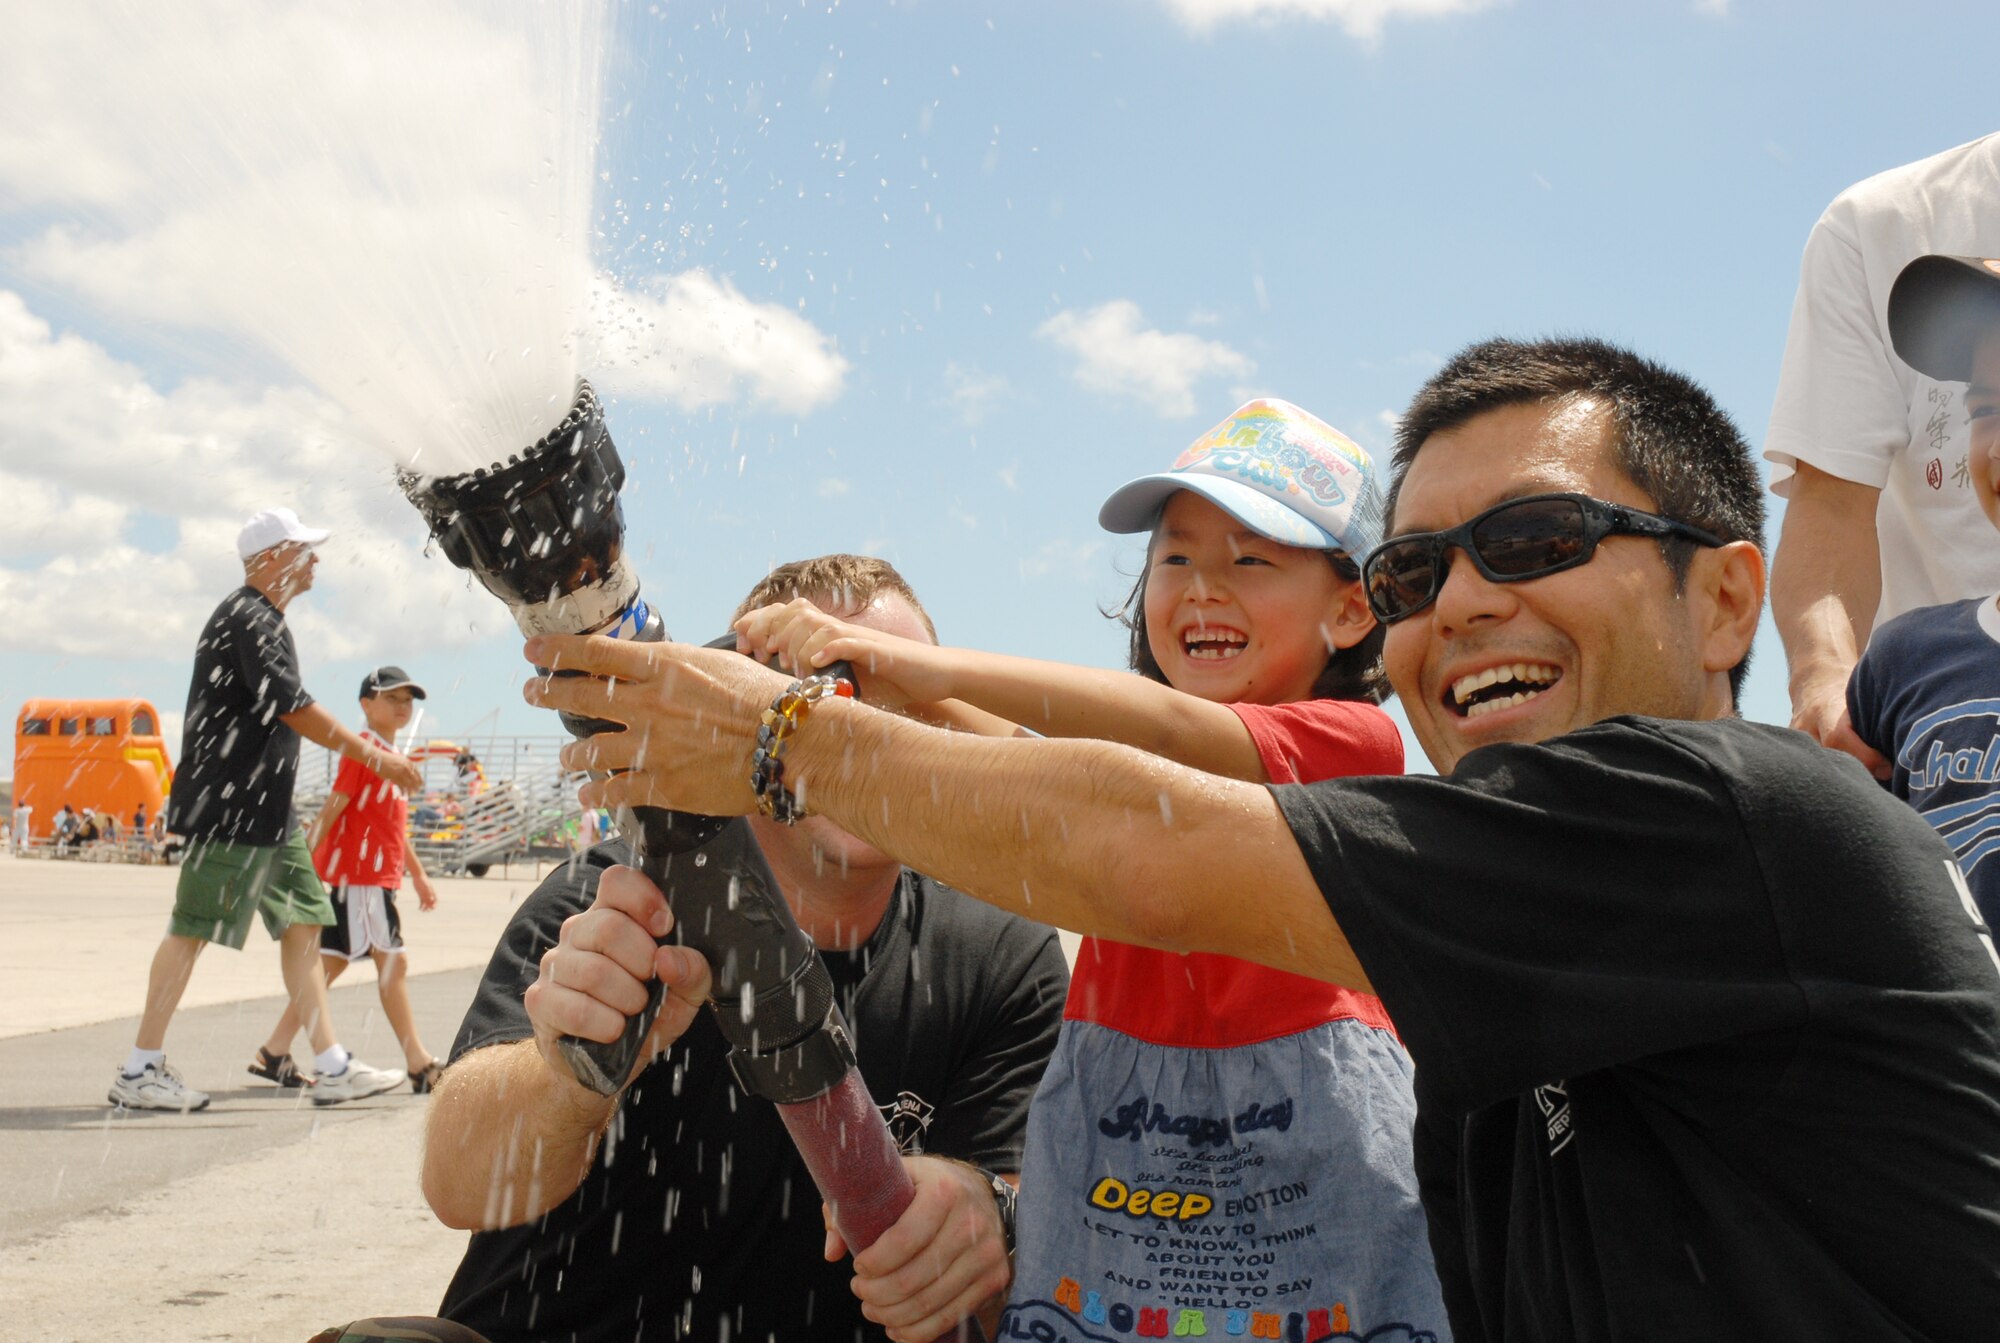 Members of the Kadena Fire Department help an Okinawan girl operate a fire hose July 5, 2008 during Kadena Air Base’s AmericaFest open house. The Fire Department was one of many units that had hands-on displays during the festival.  AmericaFest featured two dozen aircraft static displays, live entertainment, activities for children and a nightly fireworks show. The two-day event, which was designed to strengthen relations with the base's Okinawan neighbors, drew nearly 66,000 people.
(U.S. Air Force photo/Airman Chad Warren)
